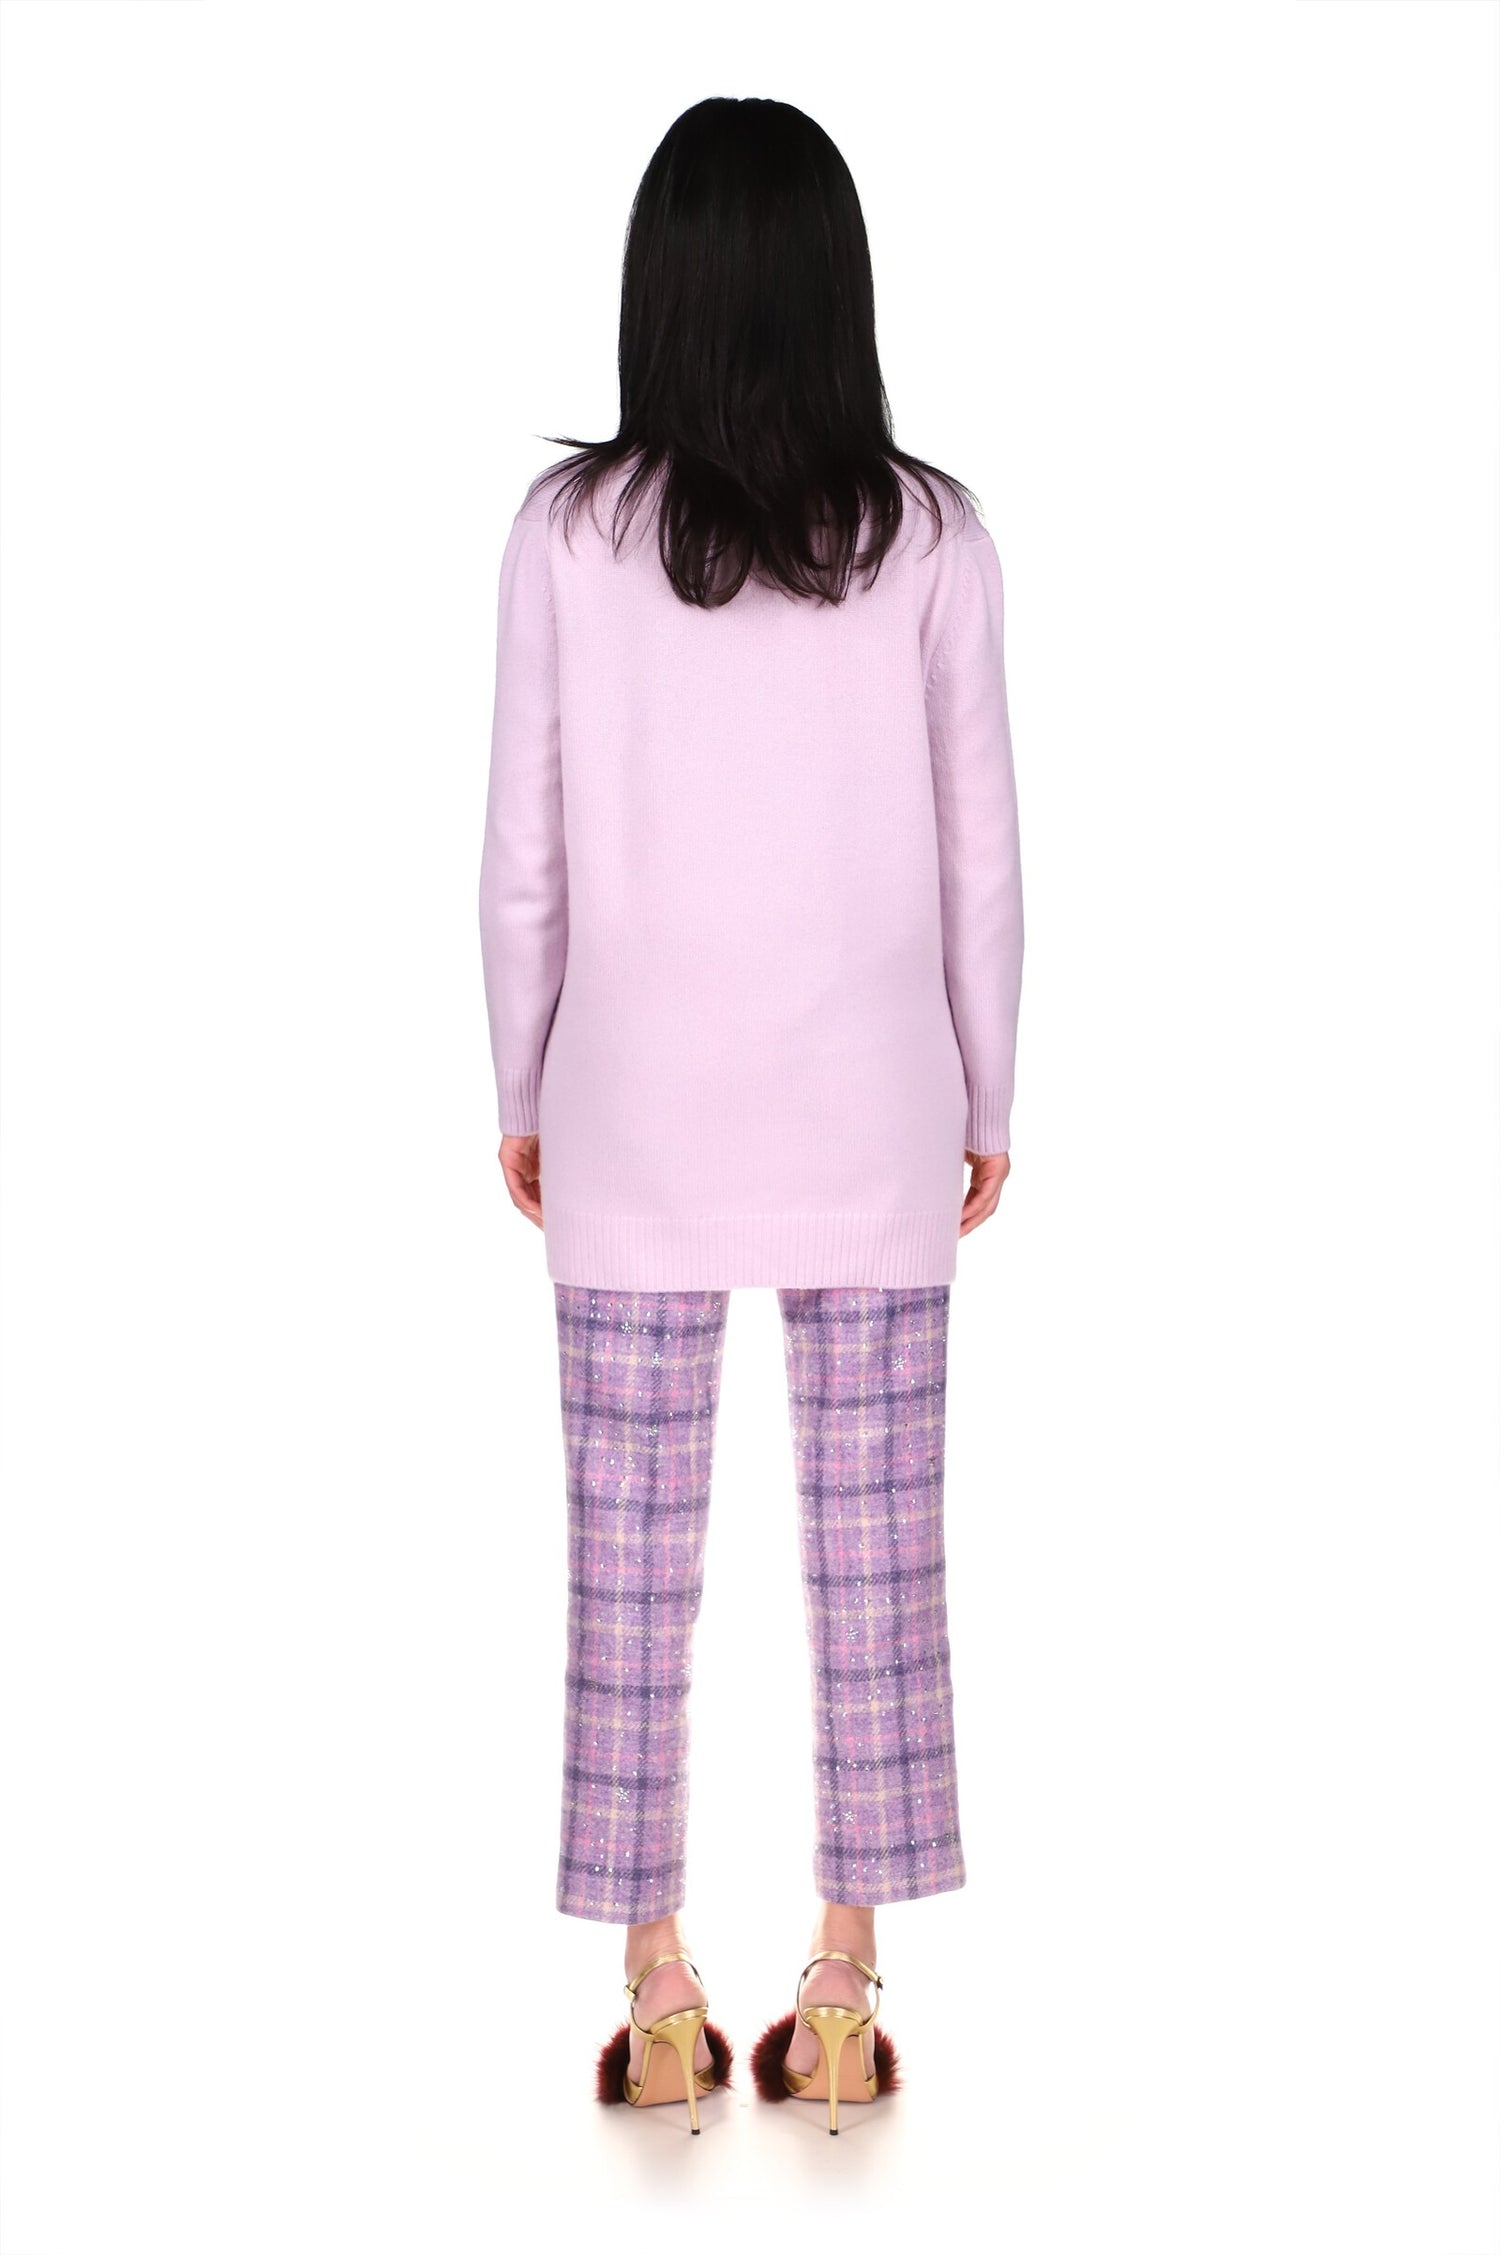 'FORGET ME NOT' LILAC CASHMERE LONG CARDIGAN - CARDIGANS - Libertine